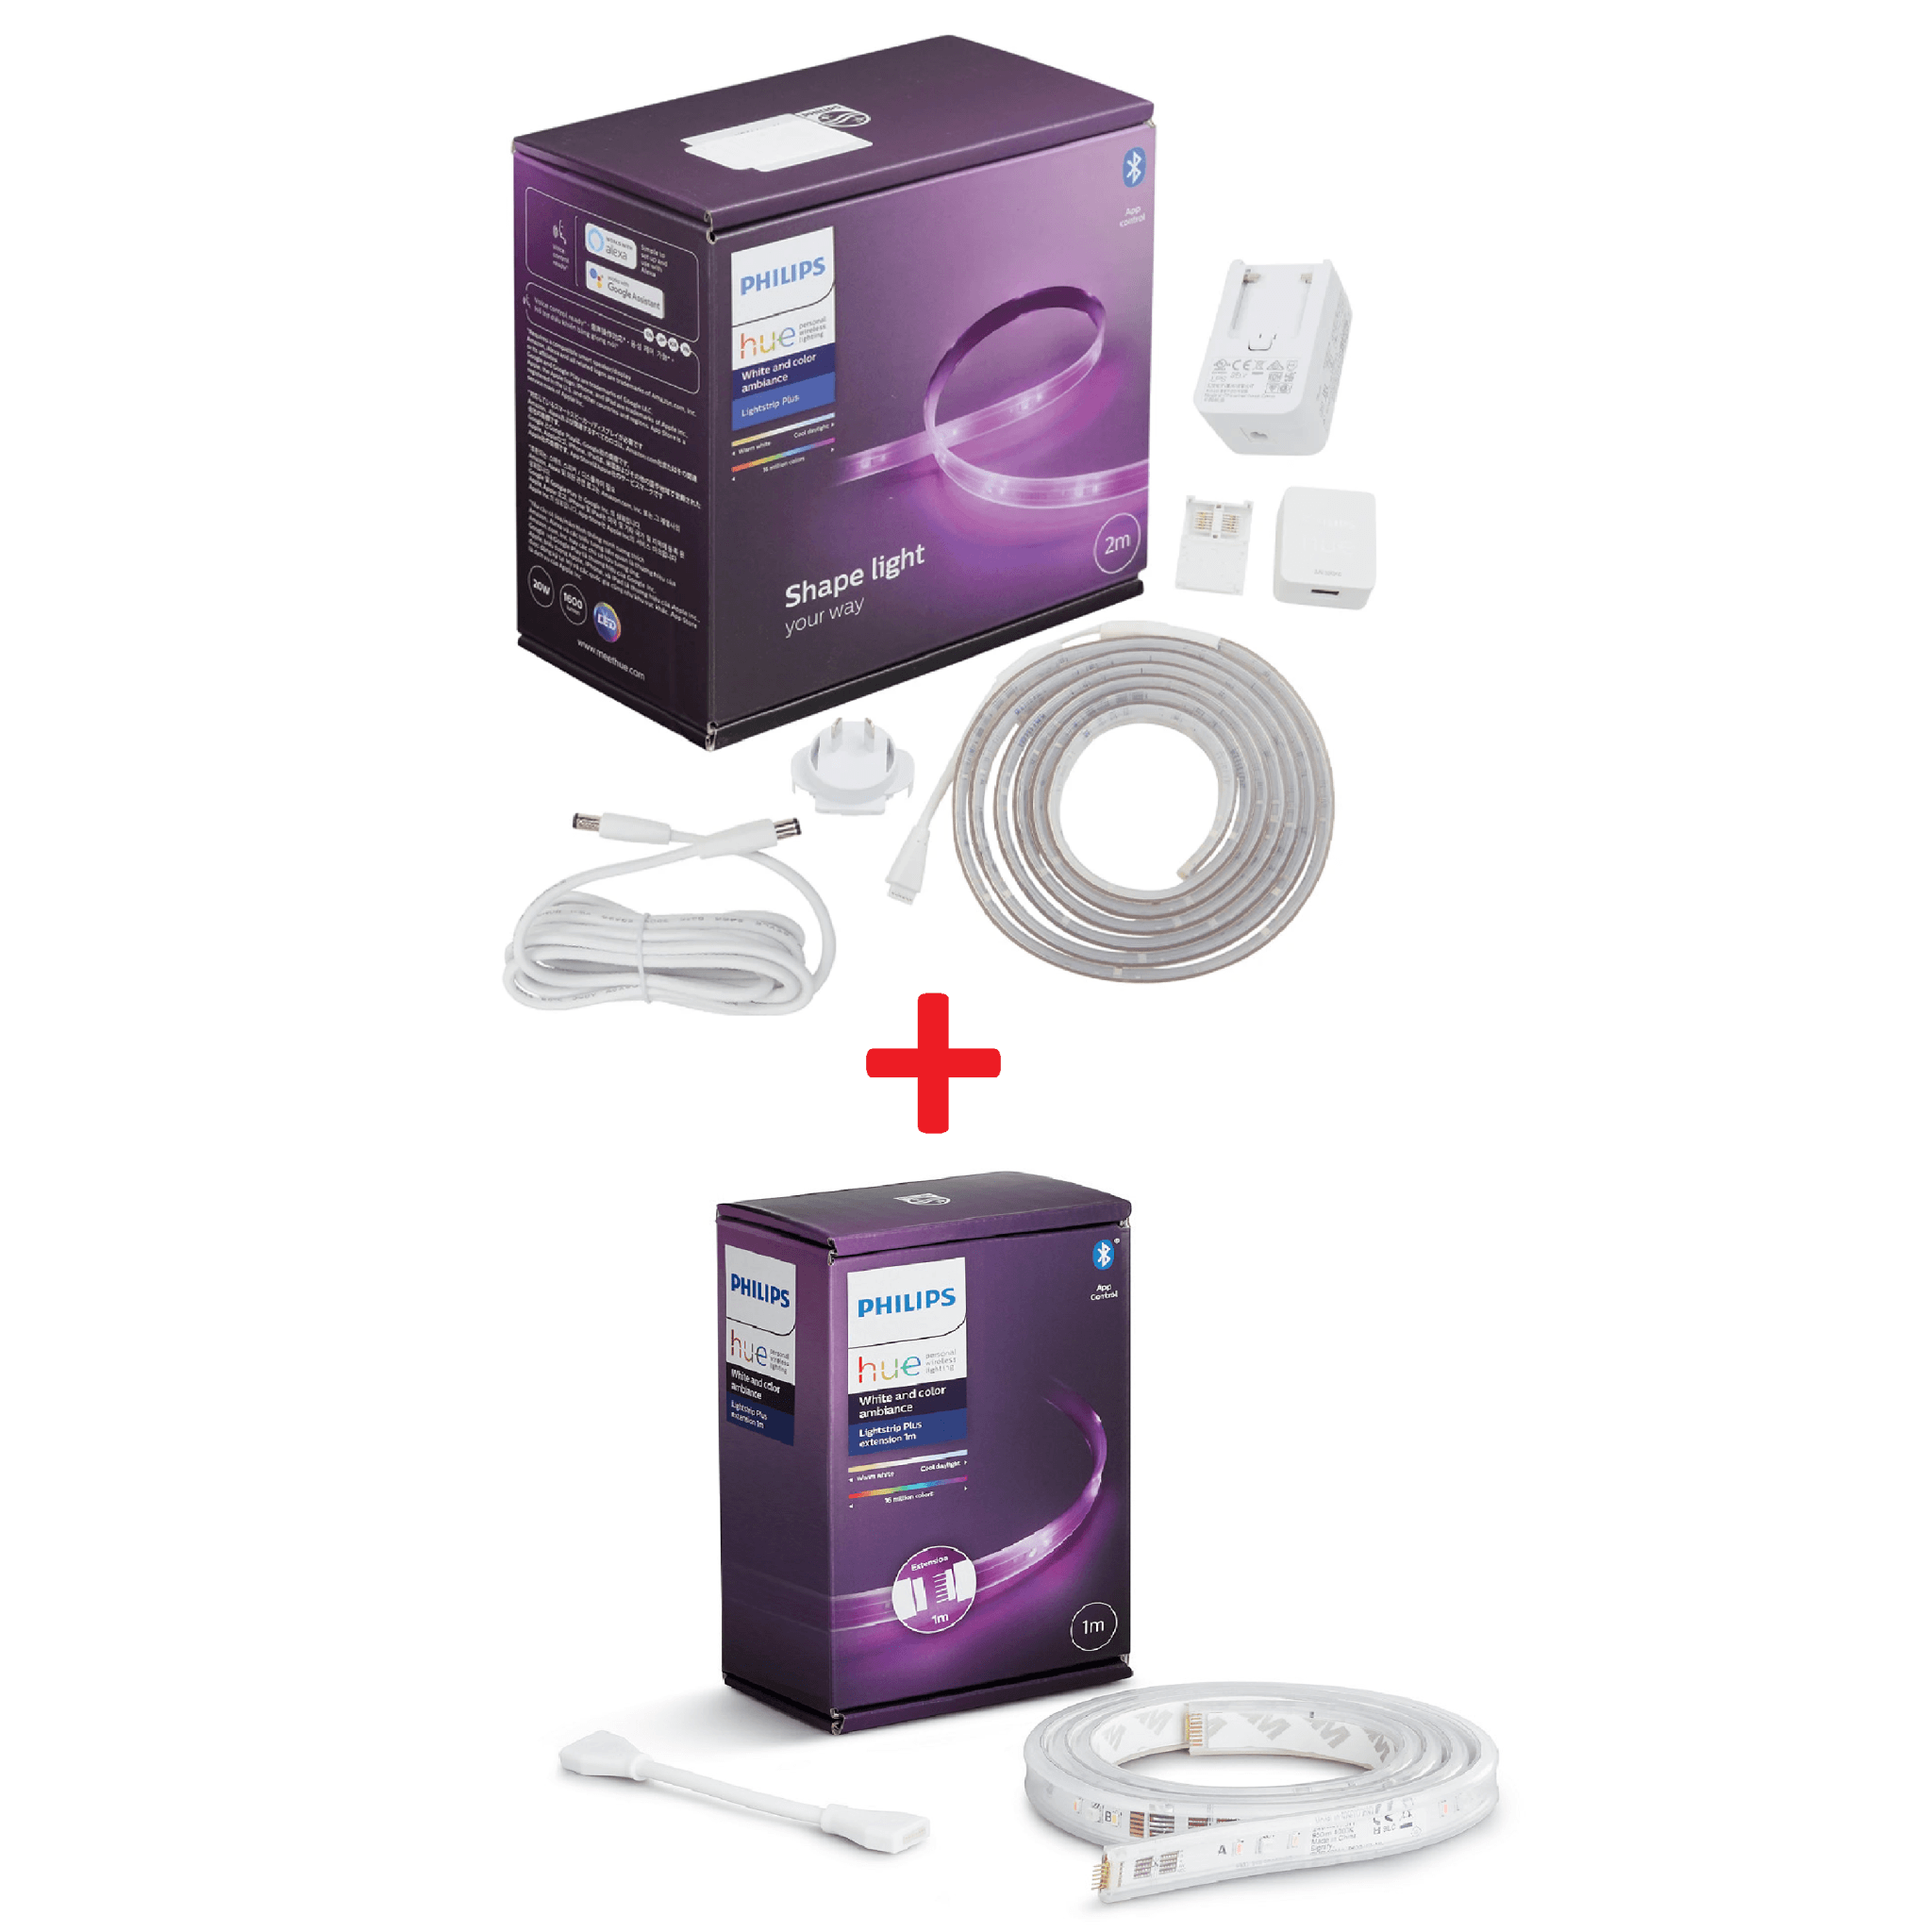  Philips Hue Outdoor 16-Foot Smart LED Light Strip - White and  Color Ambiance - 1 Pack -Requires Hue Bridge- Weatherproof - Control with  Hue App - Works with Alexa, Google Assistant